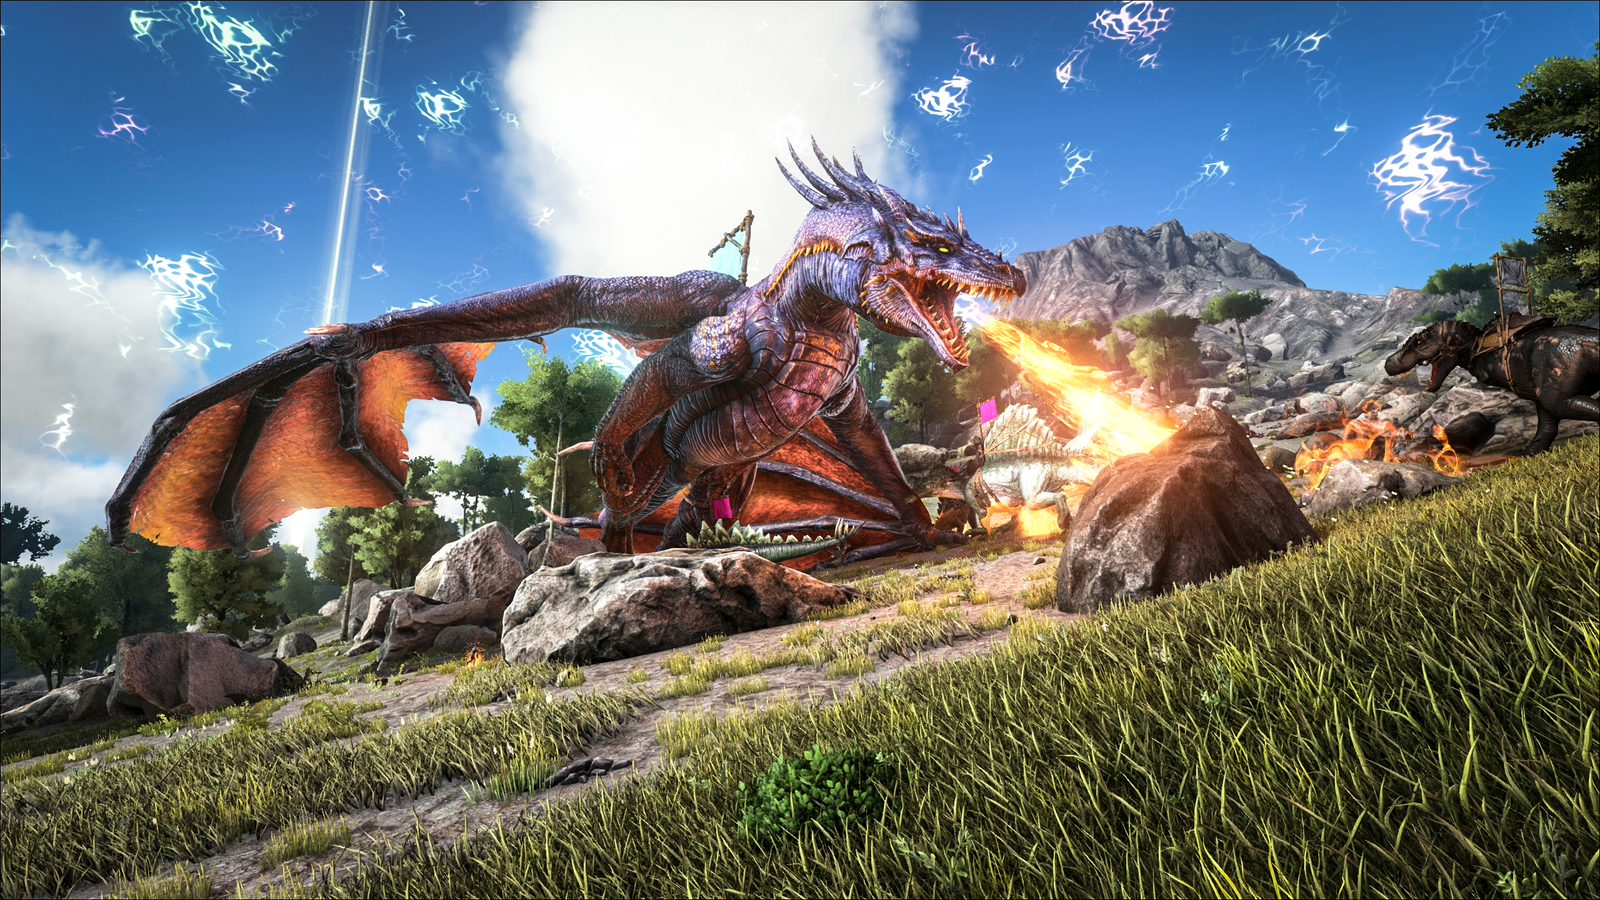 Ark: Survival Evolved studio settles legal dispute over alleged code theft,  and in a surprise twist they're now helping to 're-release' the game they  said ripped them off